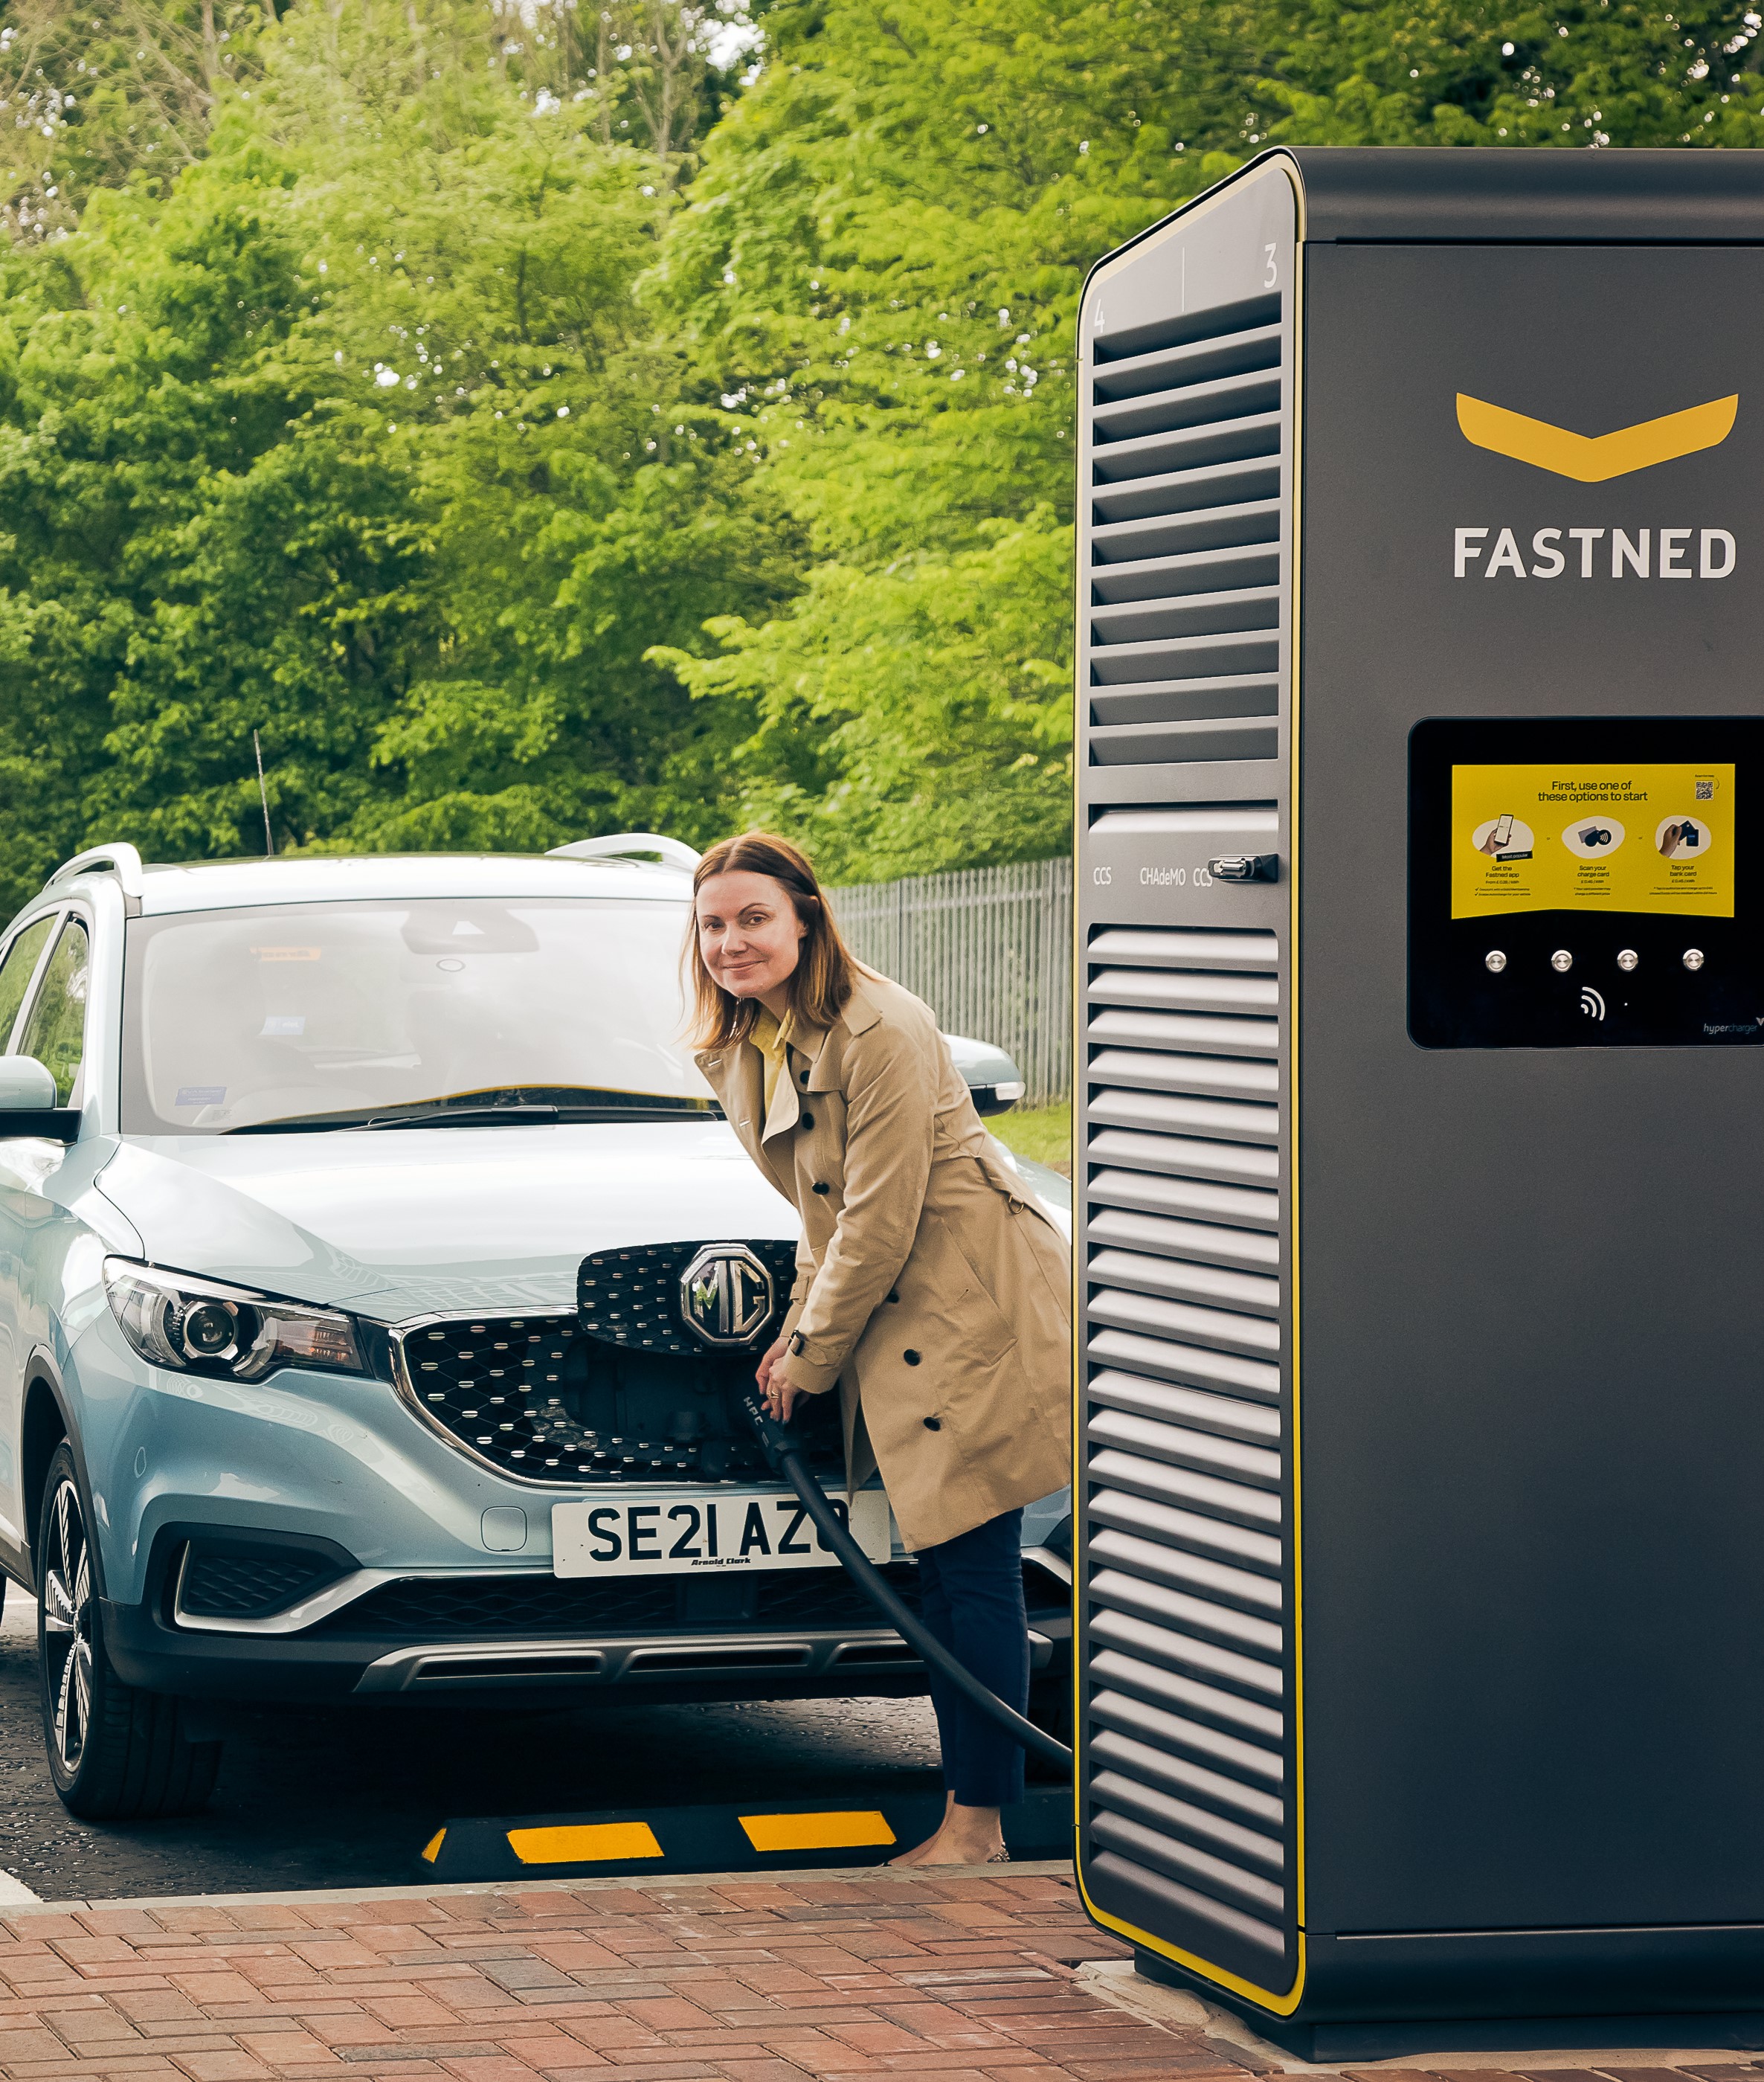 Private and public initiatives drive Scottish EV charging network expansion